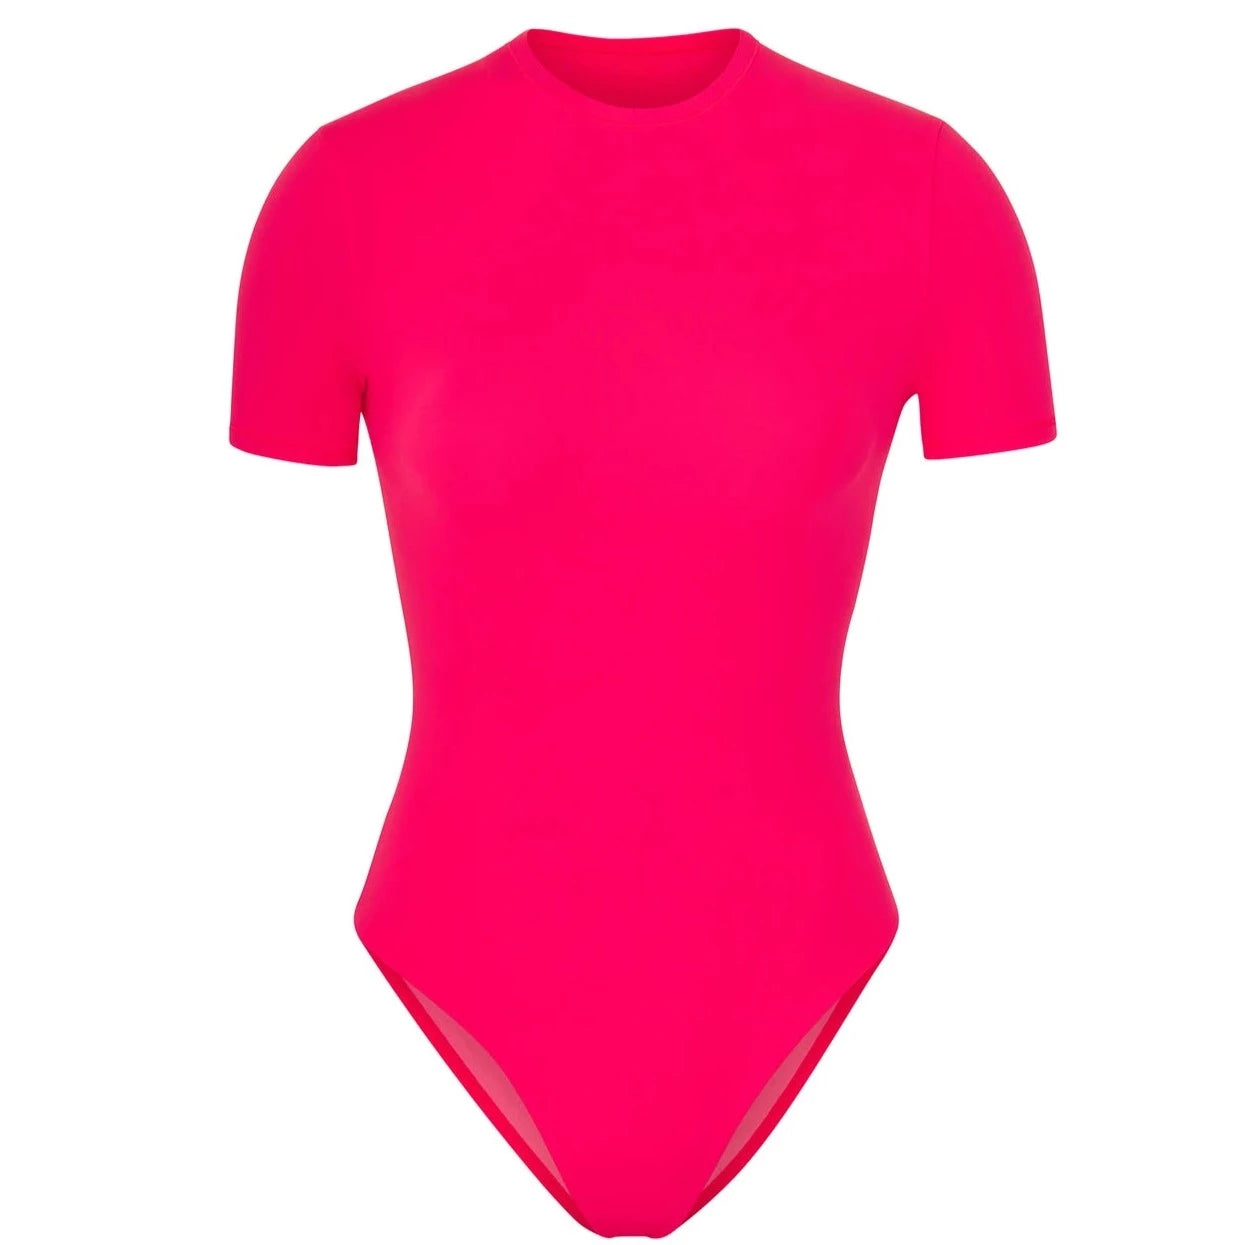 Tshirt Bodysuits: Fits Everybody Women's Round Neck T-shirts All Colors - SKINMOZ MARKET